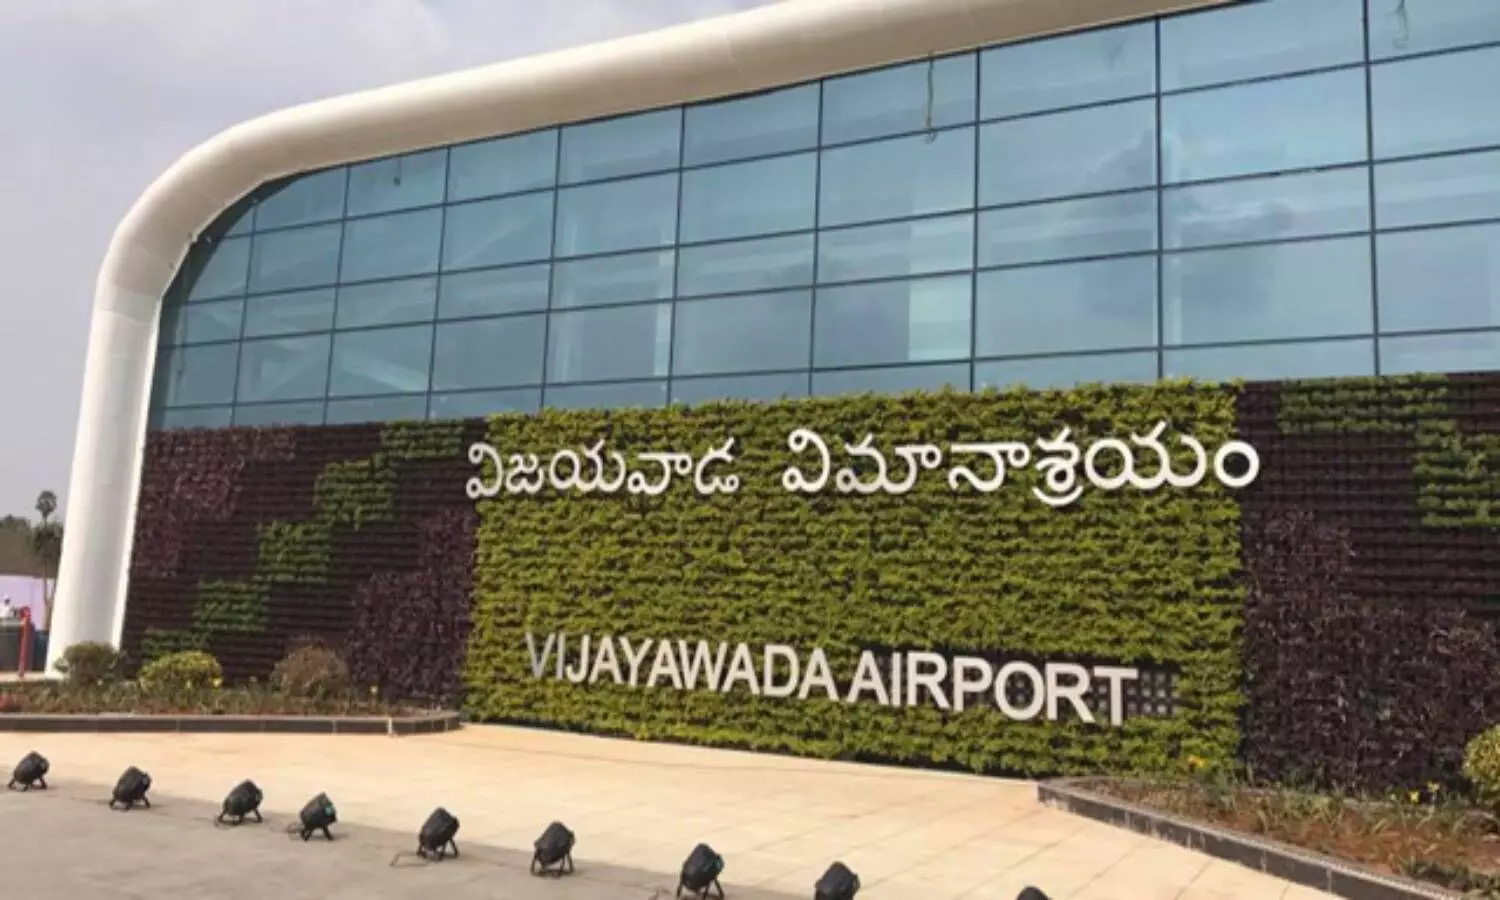 Vijayawada airport to get facial recognition-based boarding system by March 2022: Centre